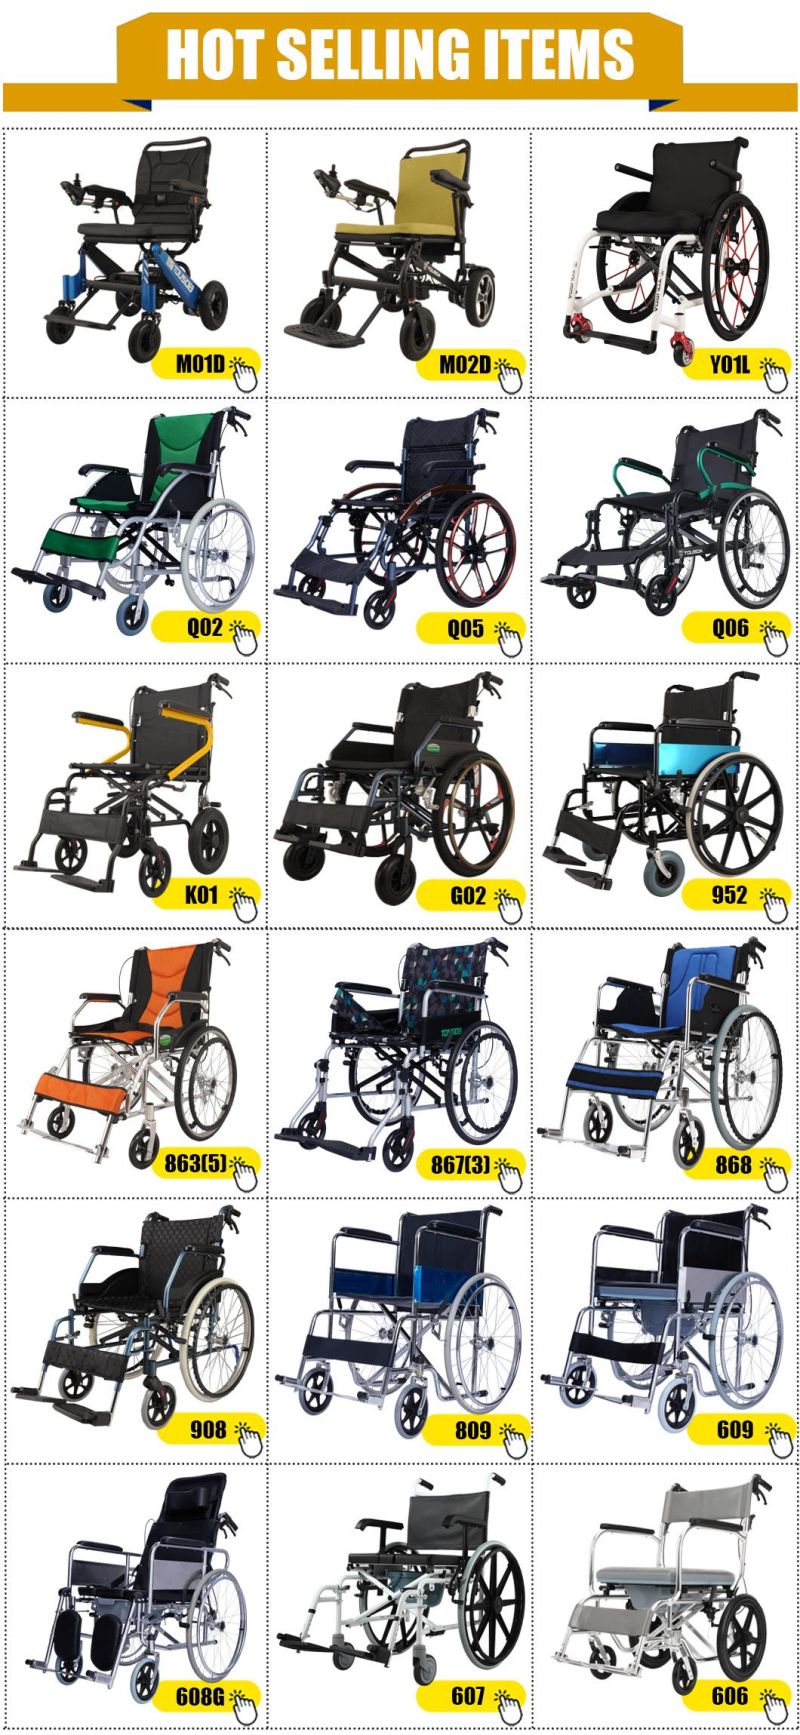 Patient Commode Wheel Chair Toilet Chair Price with Wheels for Old People